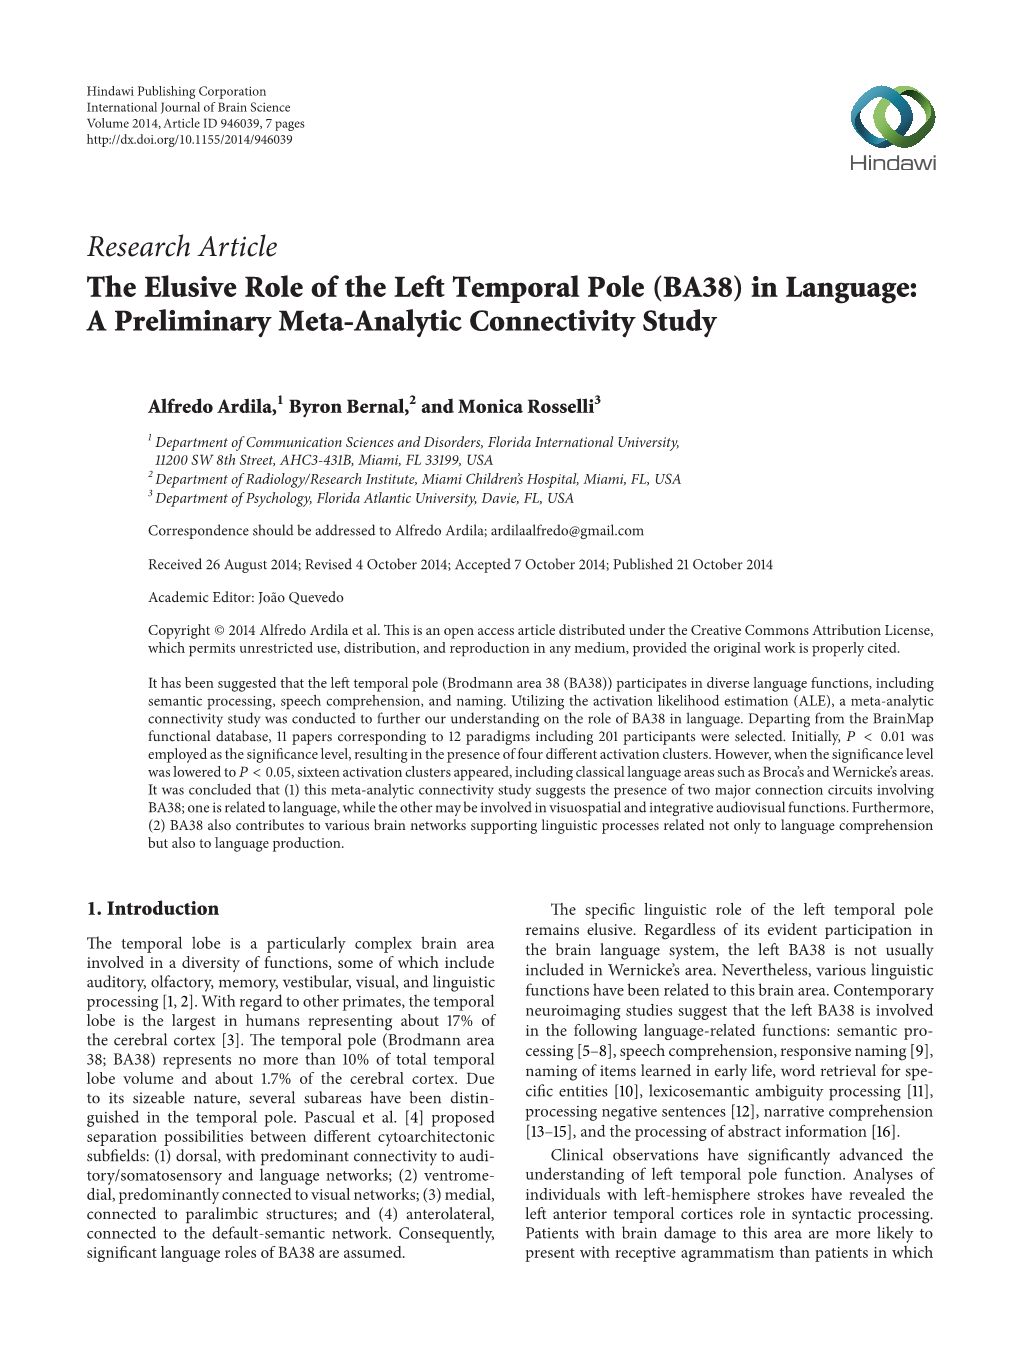 The Elusive Role of the Left Temporal Pole (BA38) in Language: a Preliminary Meta-Analytic Connectivity Study